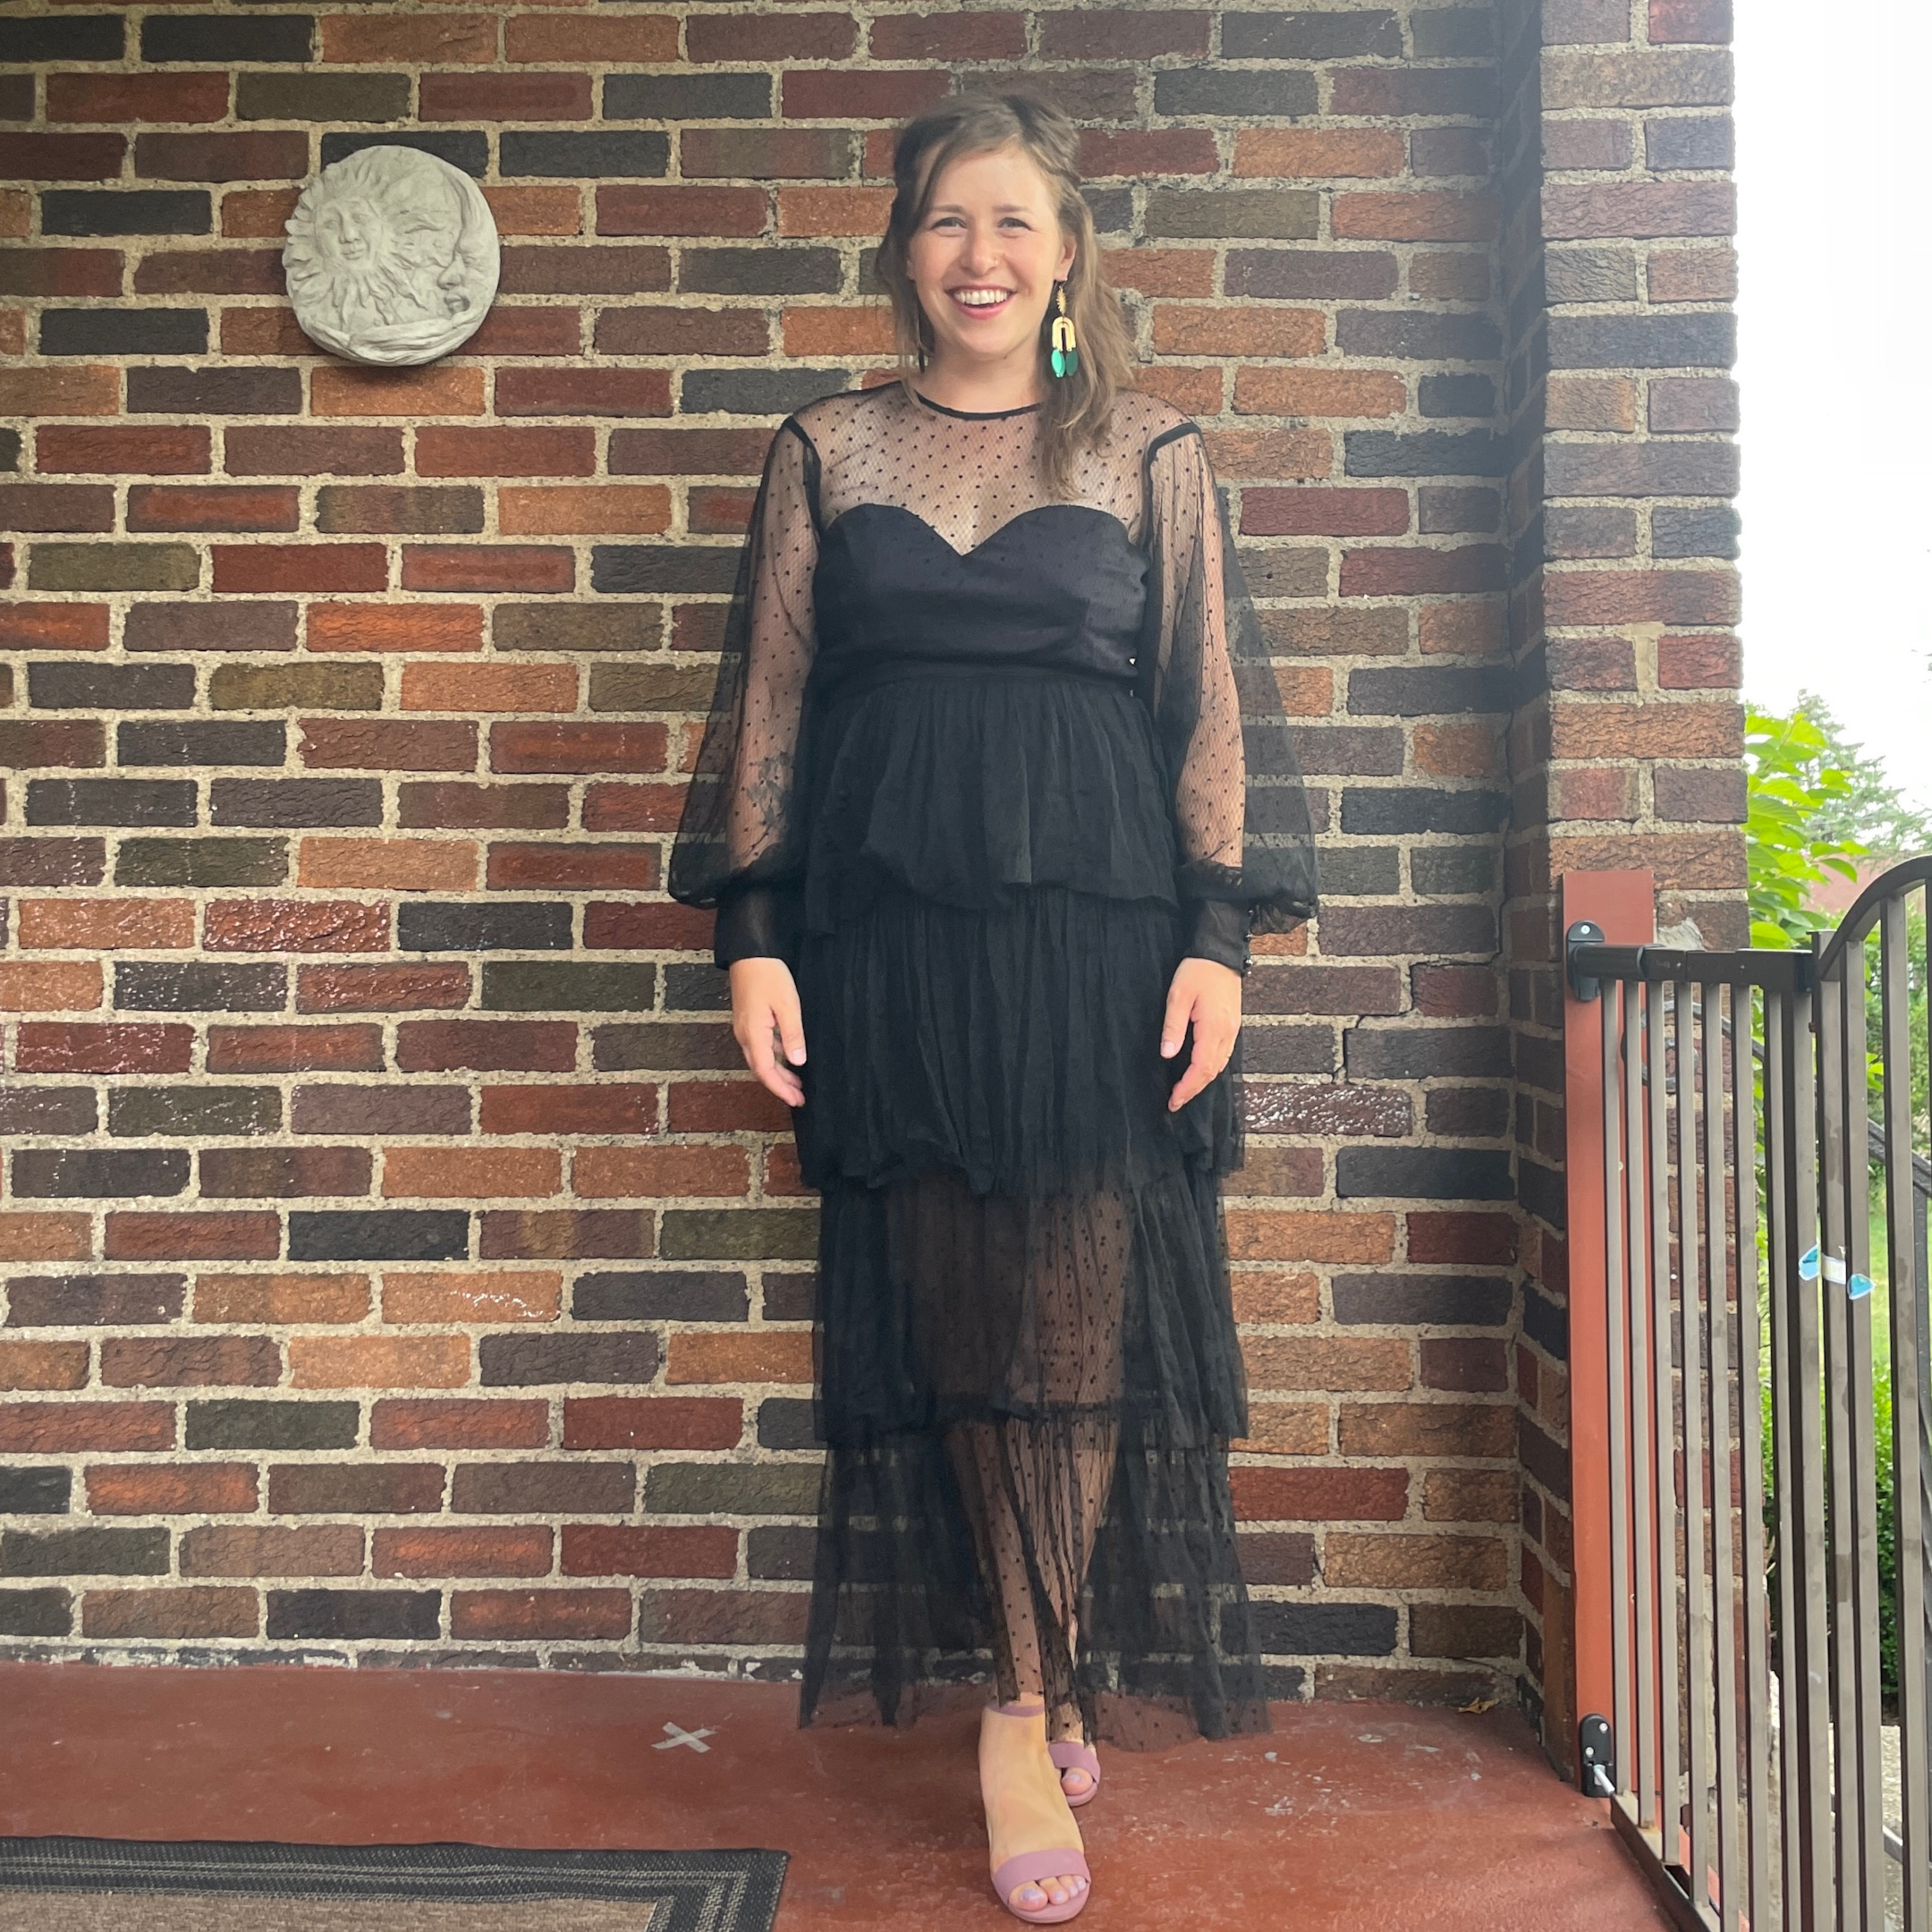 Christen showcasing her Alice McCall Mysteria Ruffled Midi Dress from Nuuly's clothing subscription service.